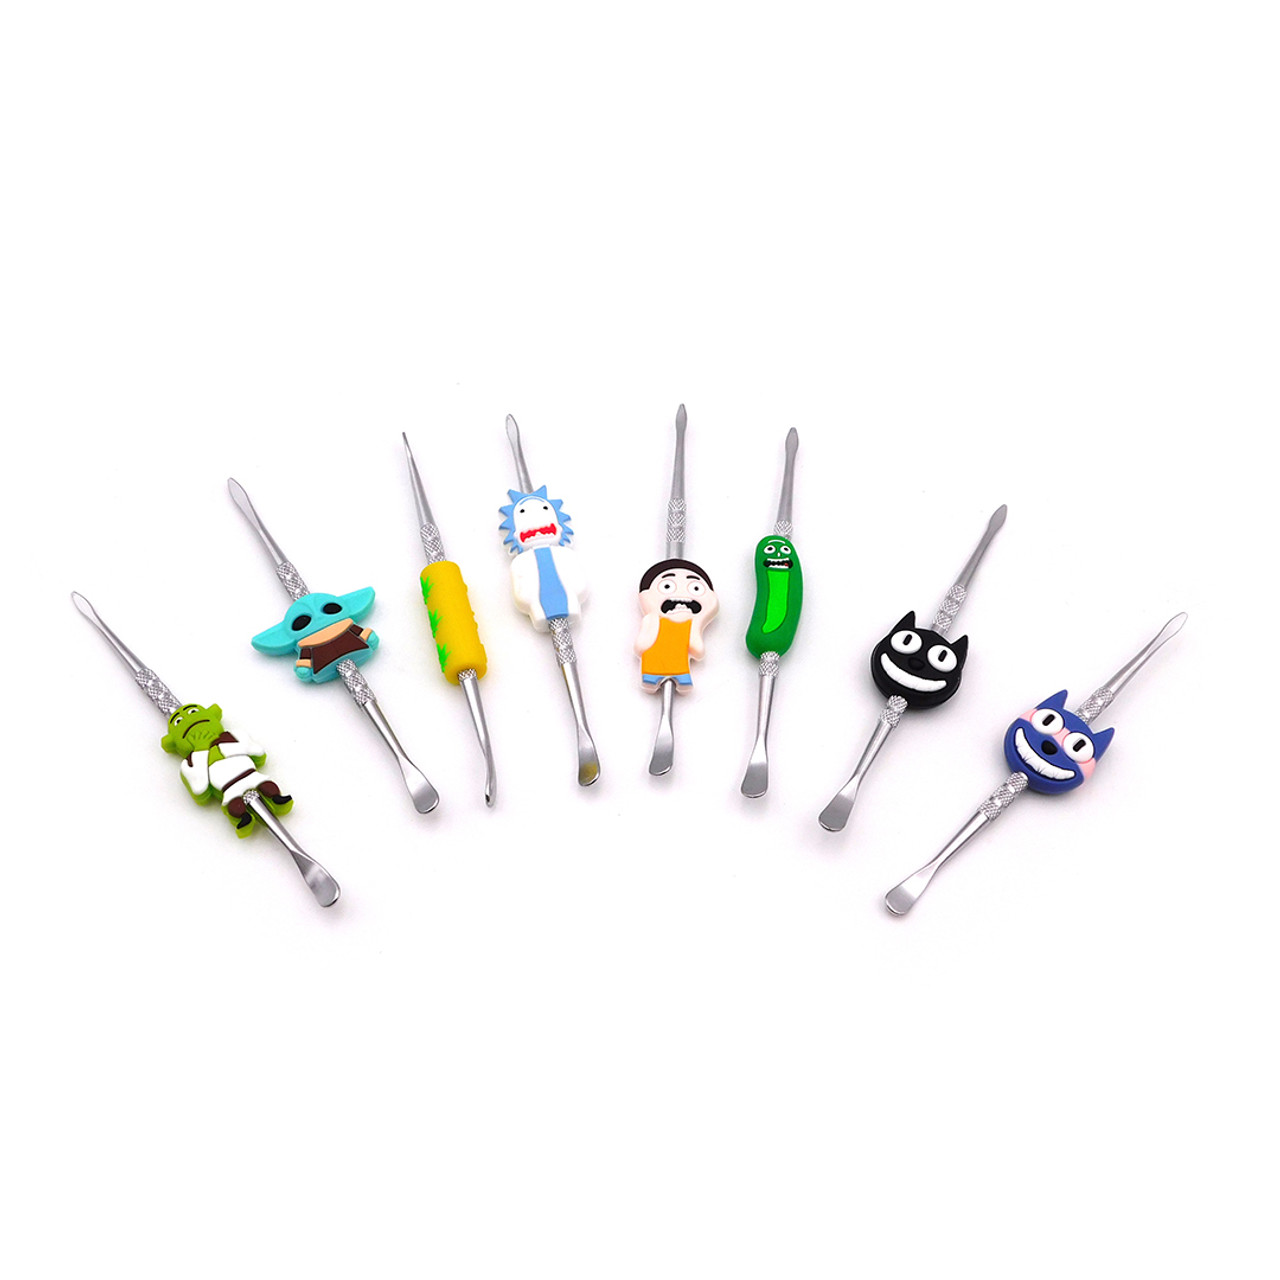 Dabbers Metal Dab Tool With Silicone Sleeves – Assorted Colors